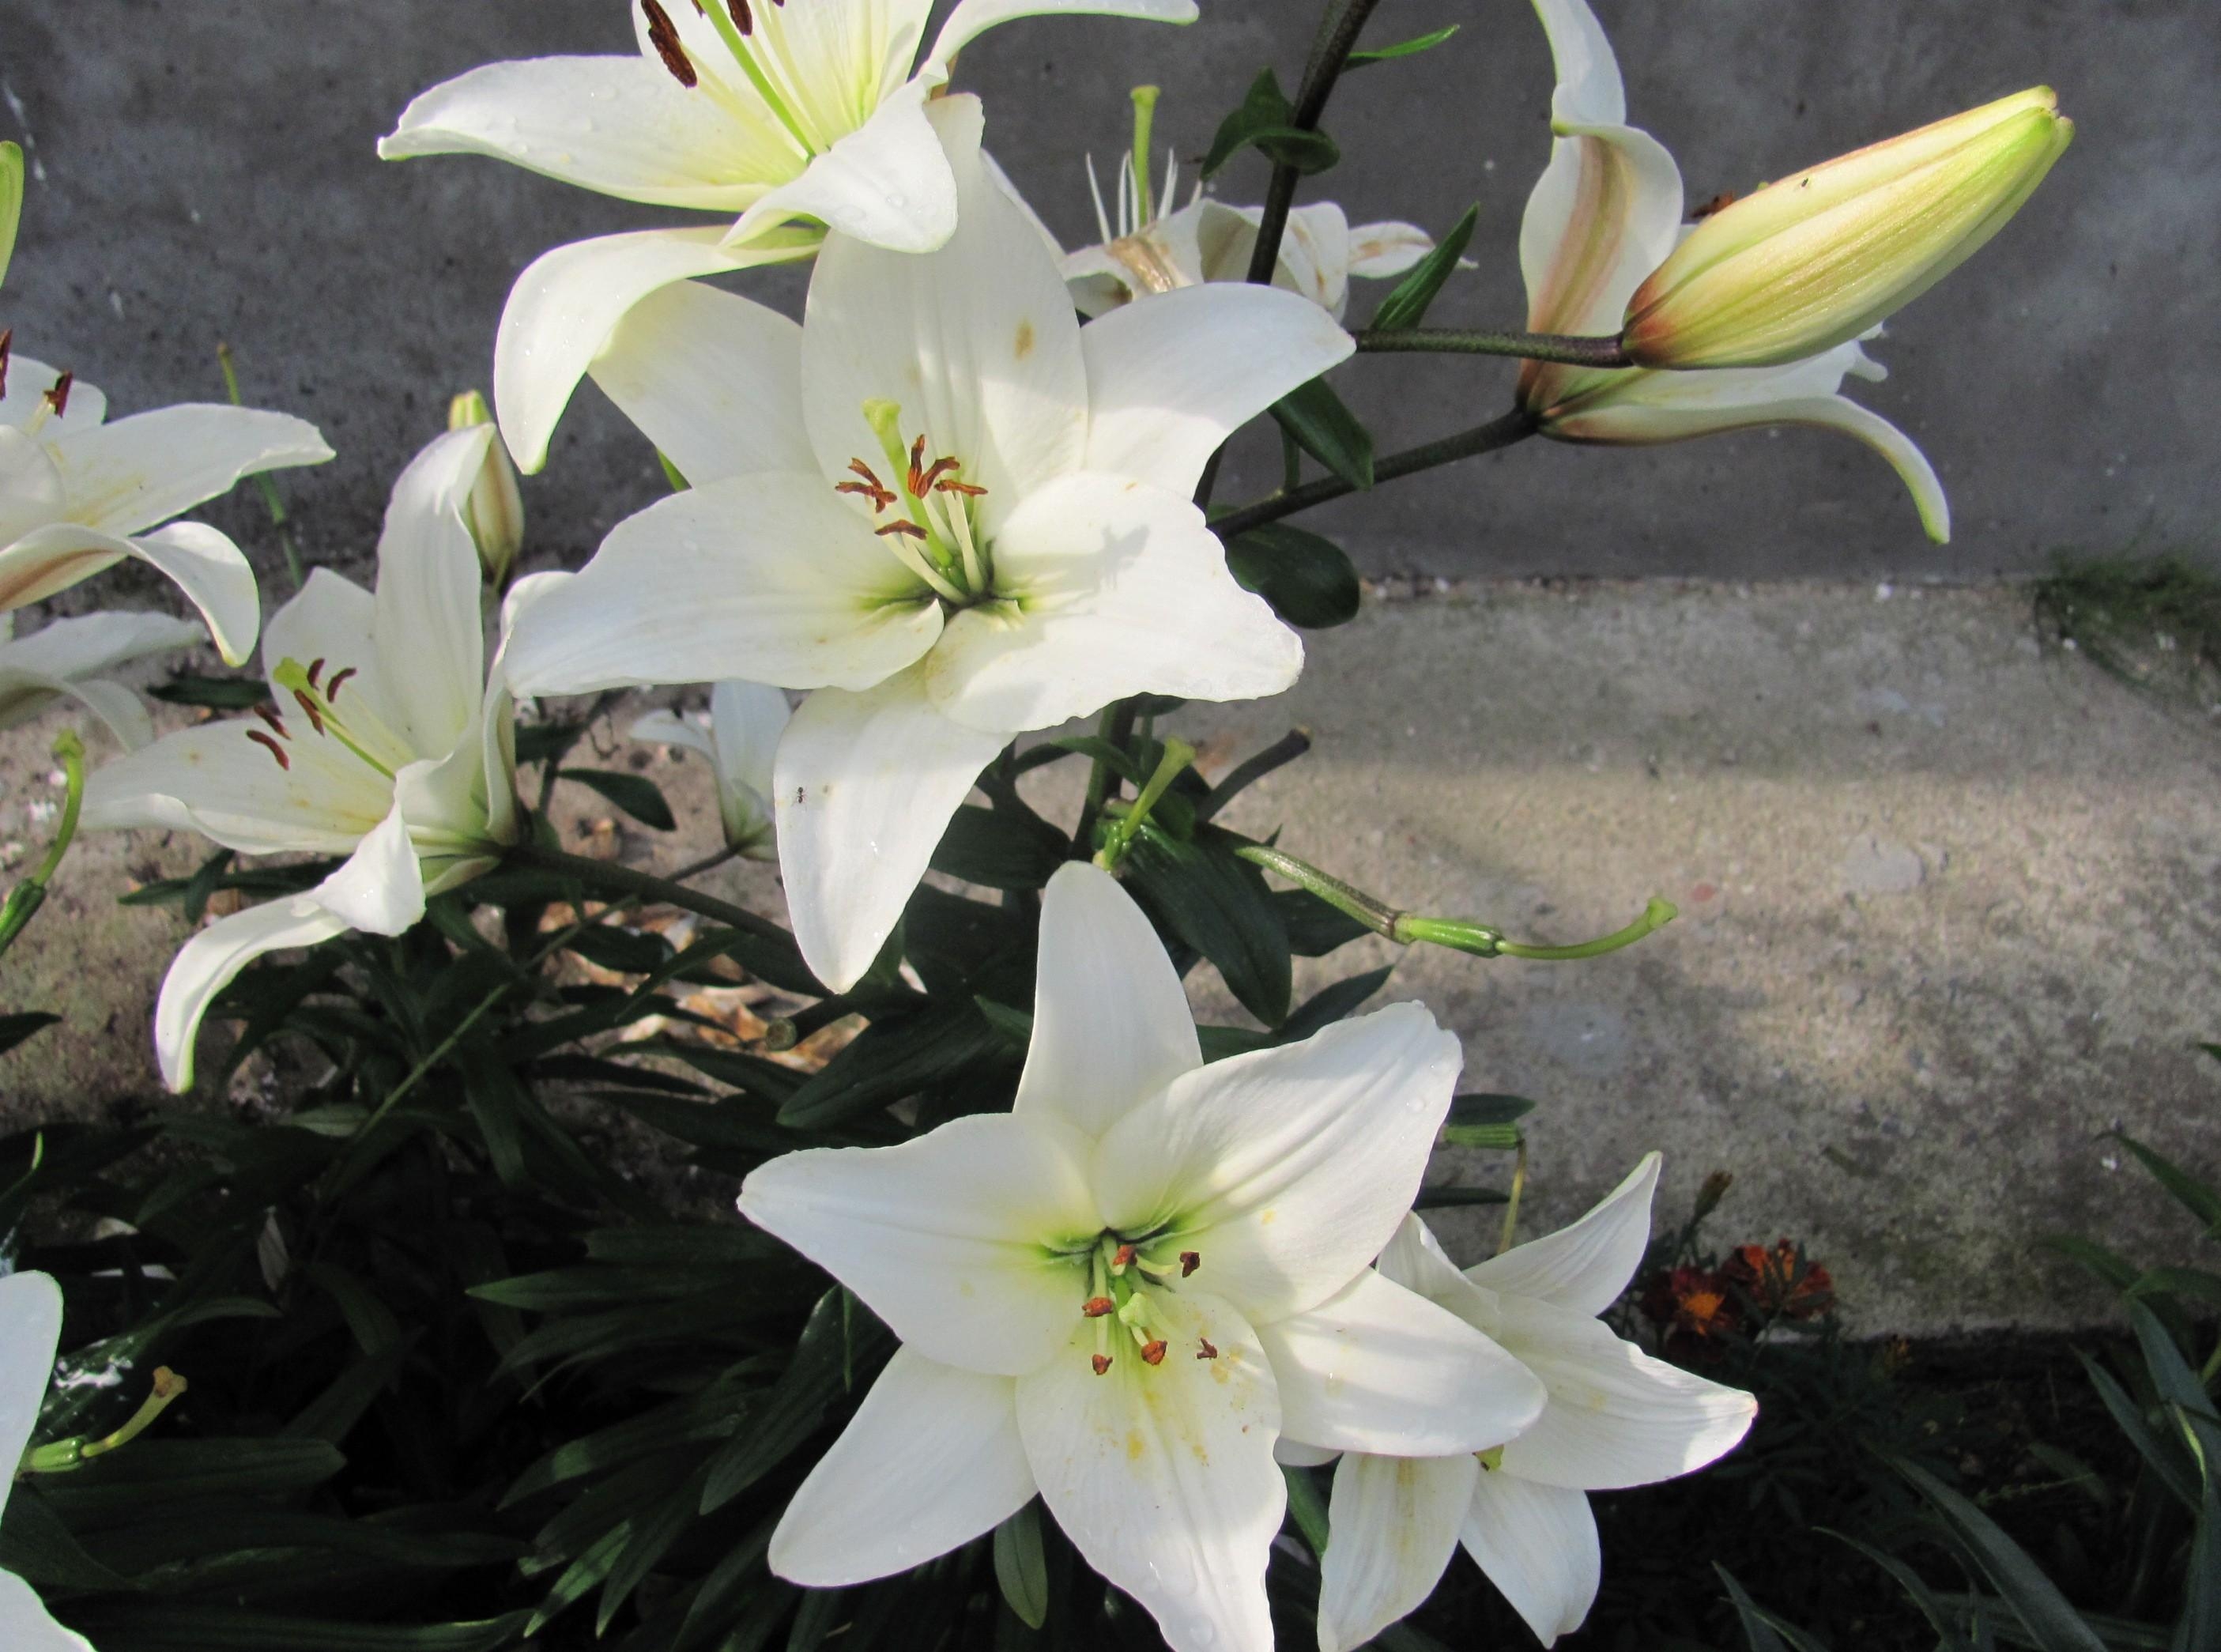 lilies, snow white, flowers, white, bud, greens, flower bed, flowerbed iphone wallpaper